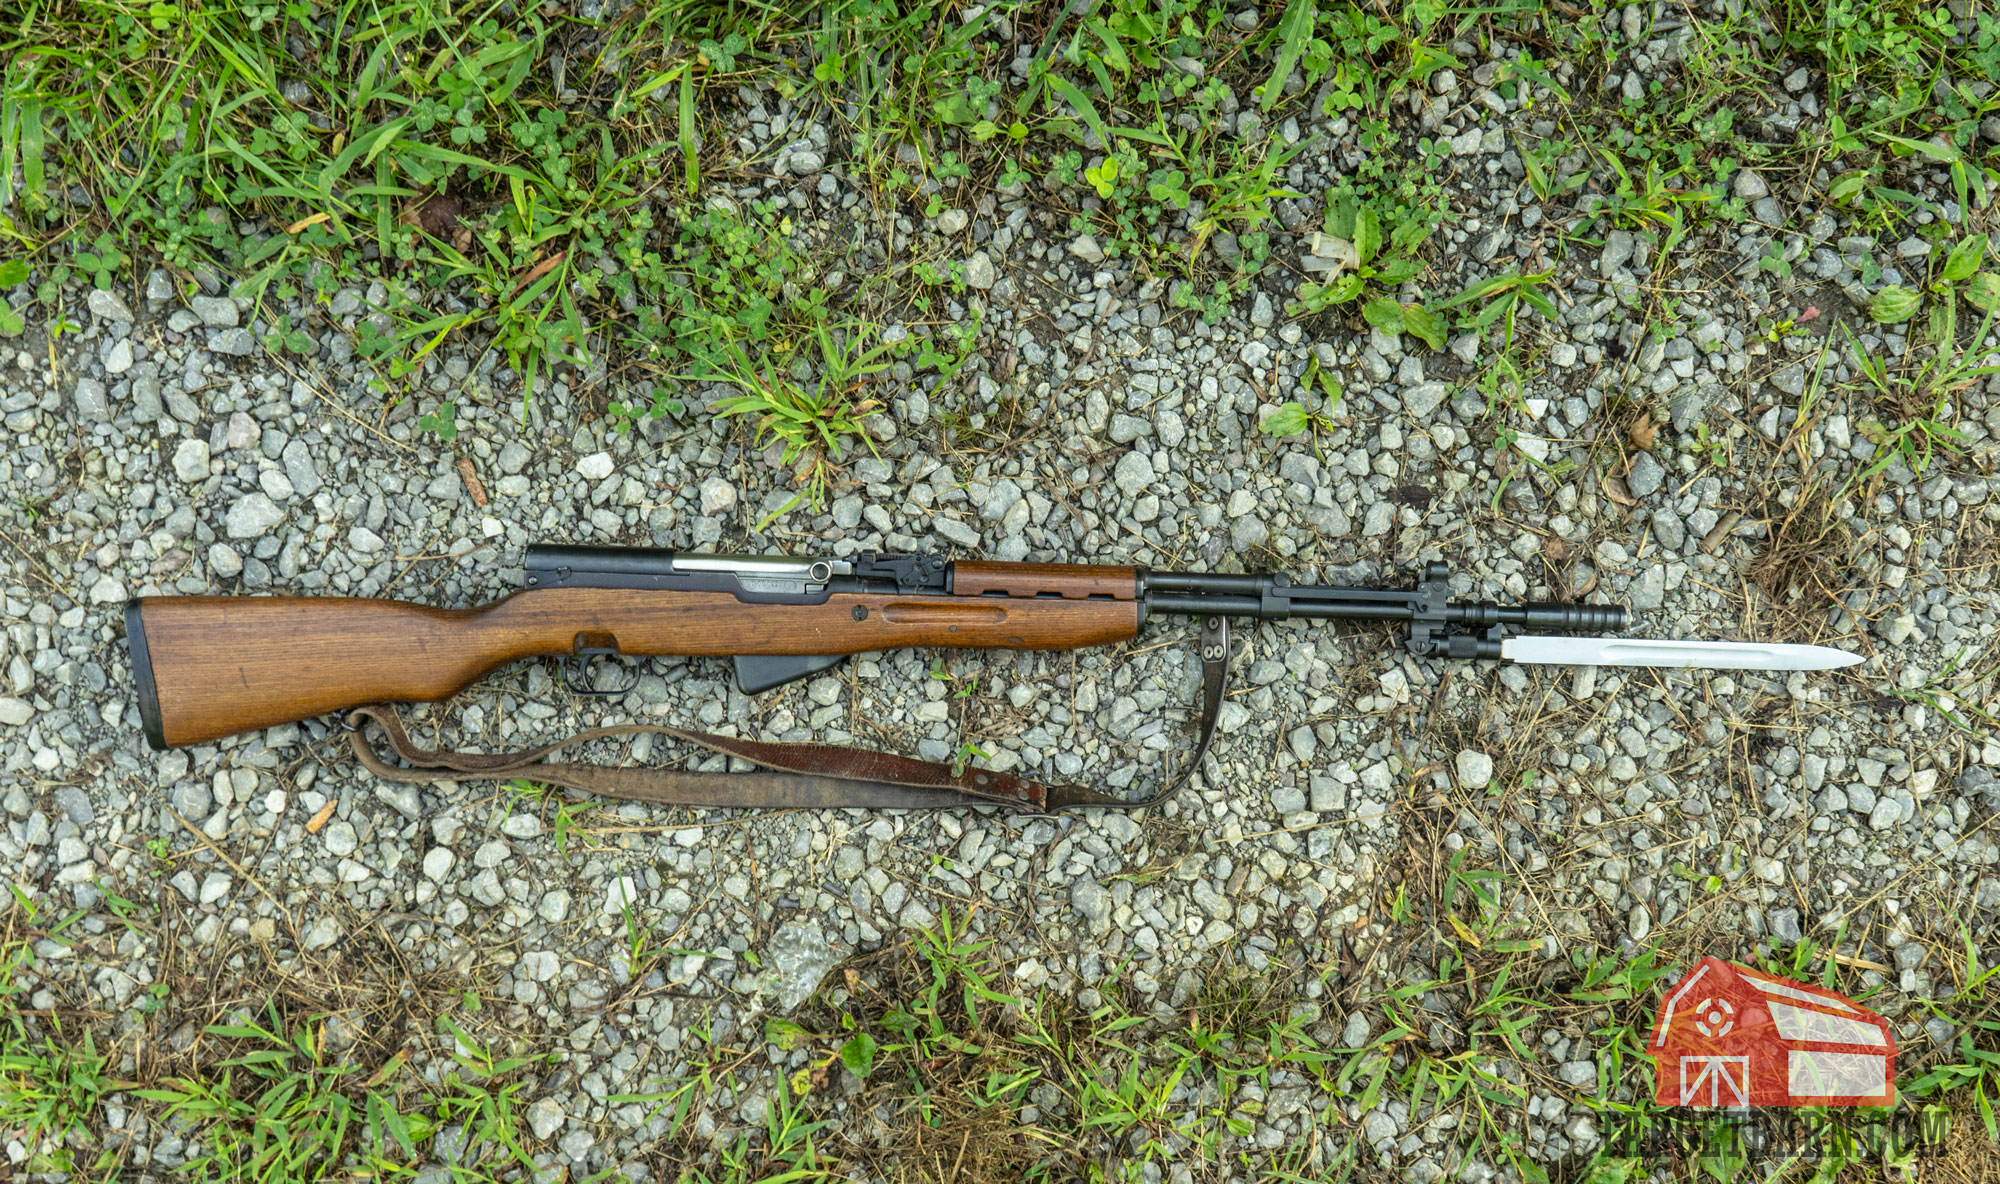 an sks rifle laying on the ground with bayonet extended